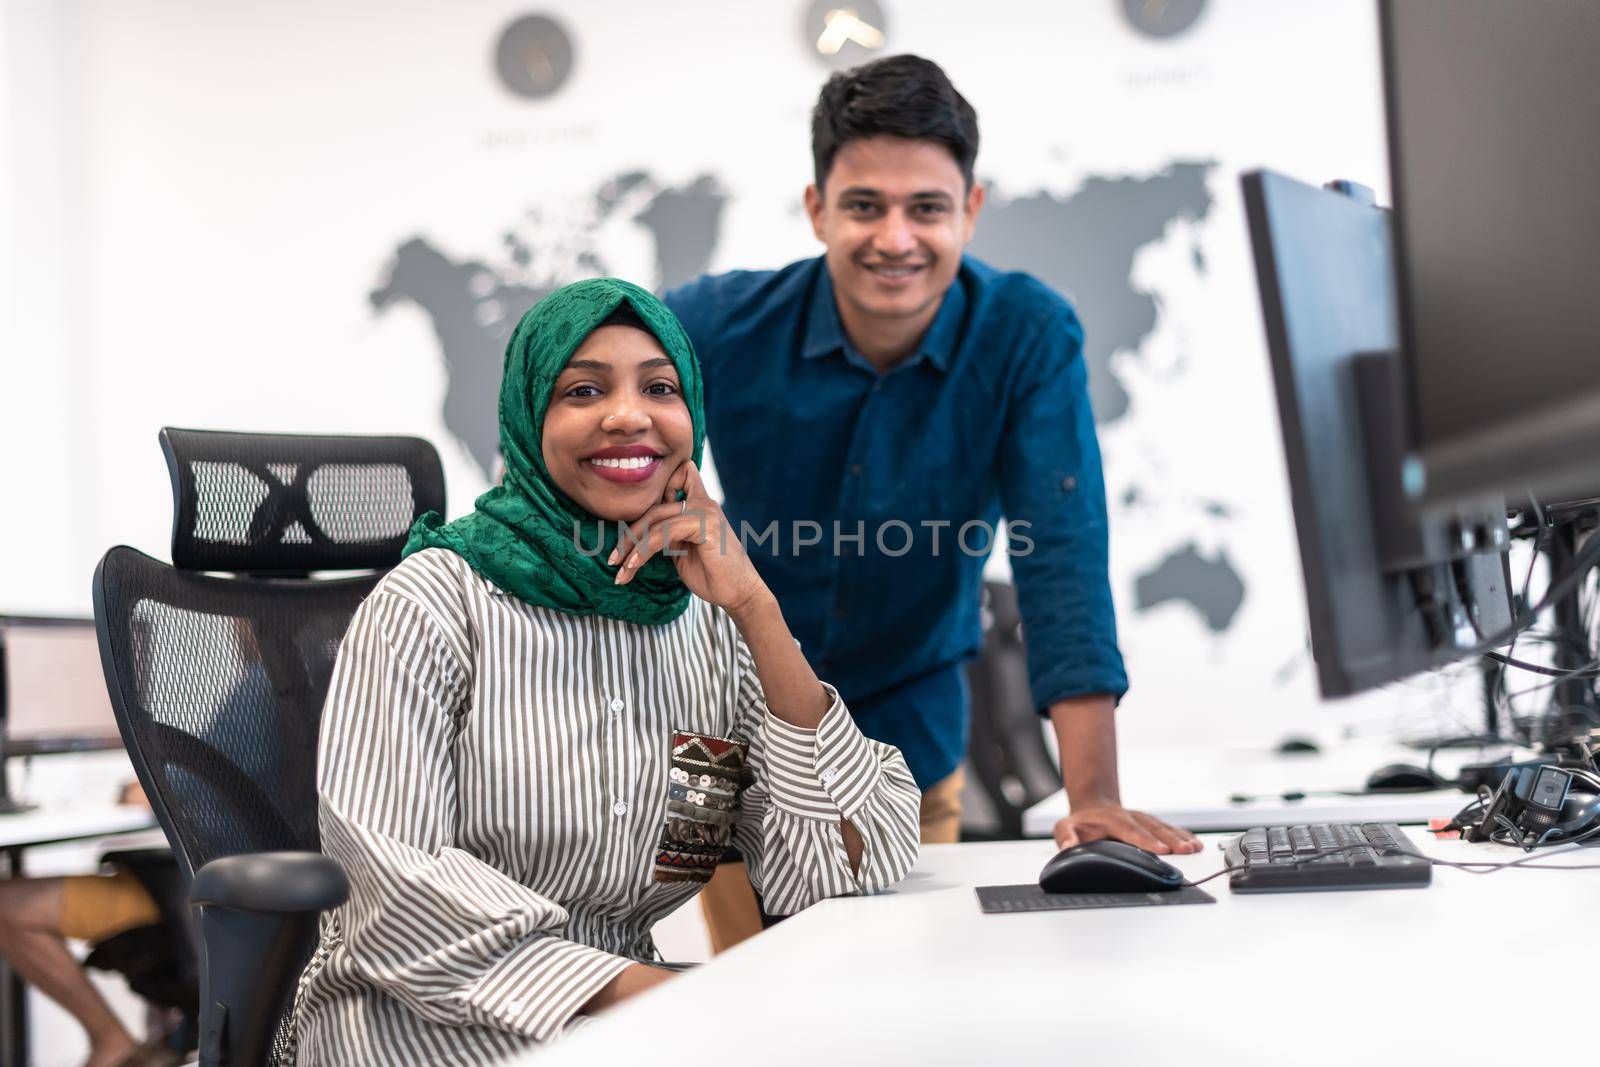 Multiethnic startup business team Arabian woman wearing a hijab on meeting in modern open plan office interior brainstorming, working on laptop and desktop computer. Selective focus. High-quality photo